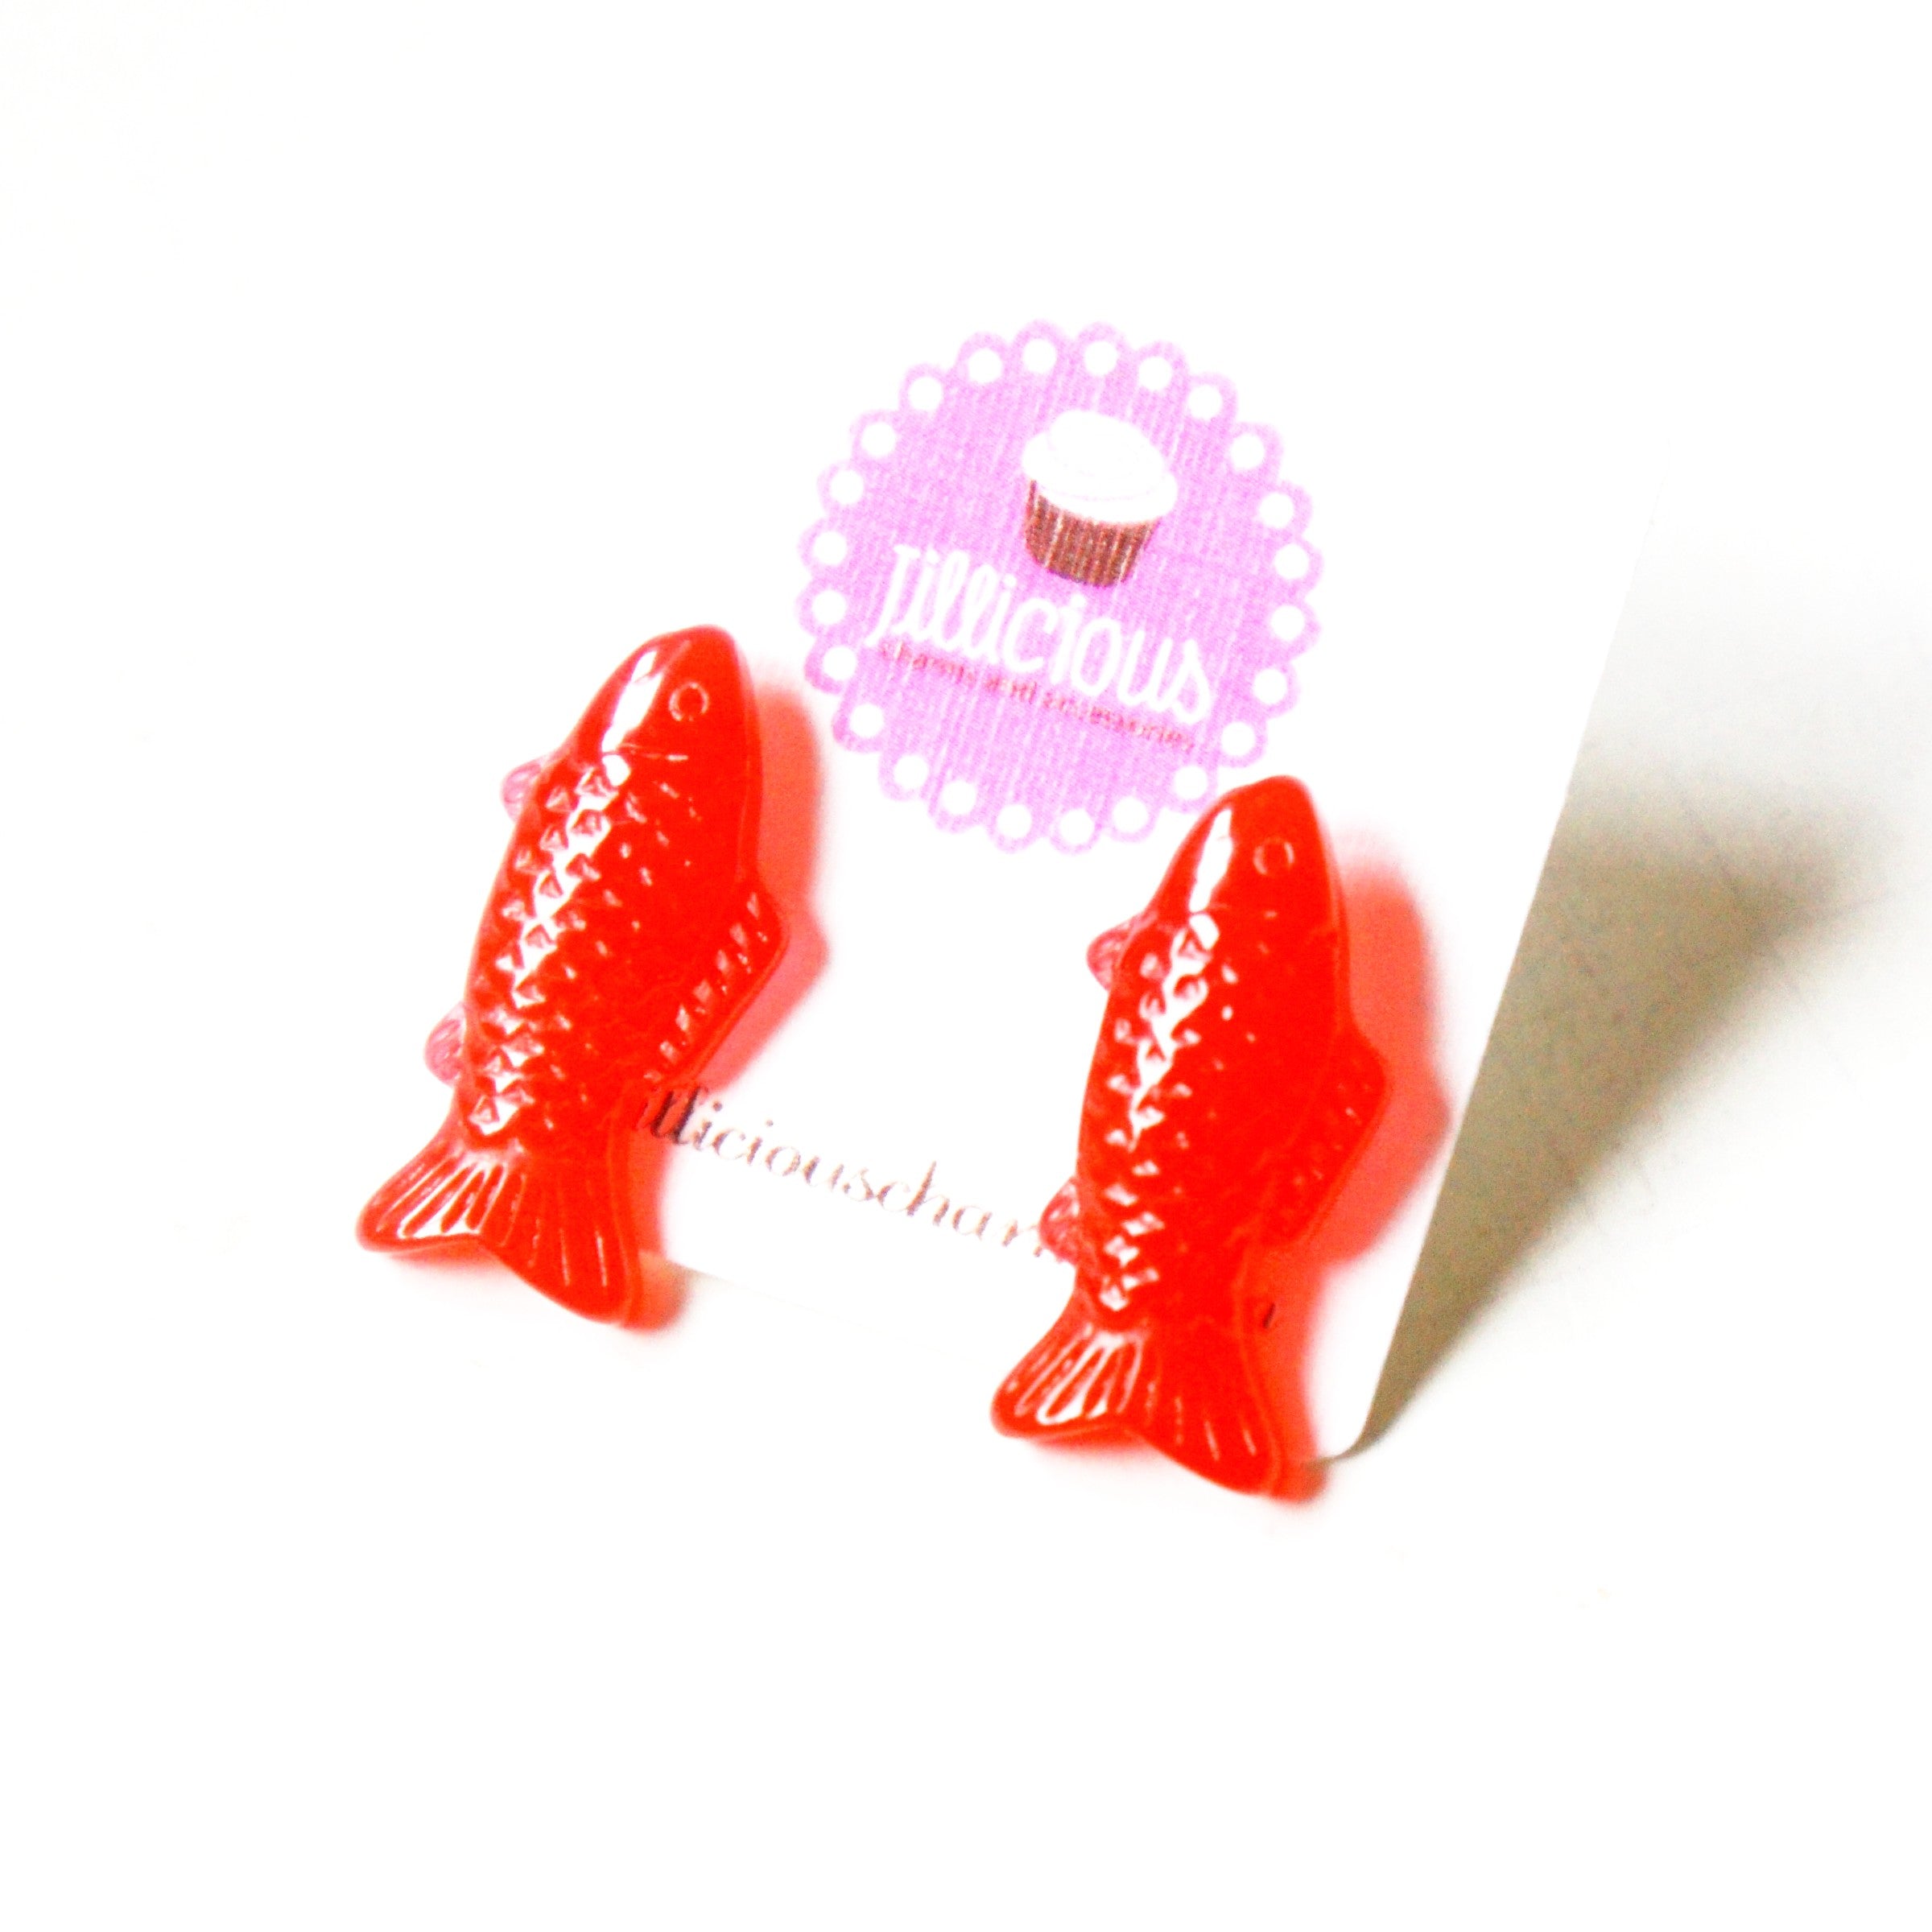 Swedish Fish Stud Earrings - Jillicious charms and accessories